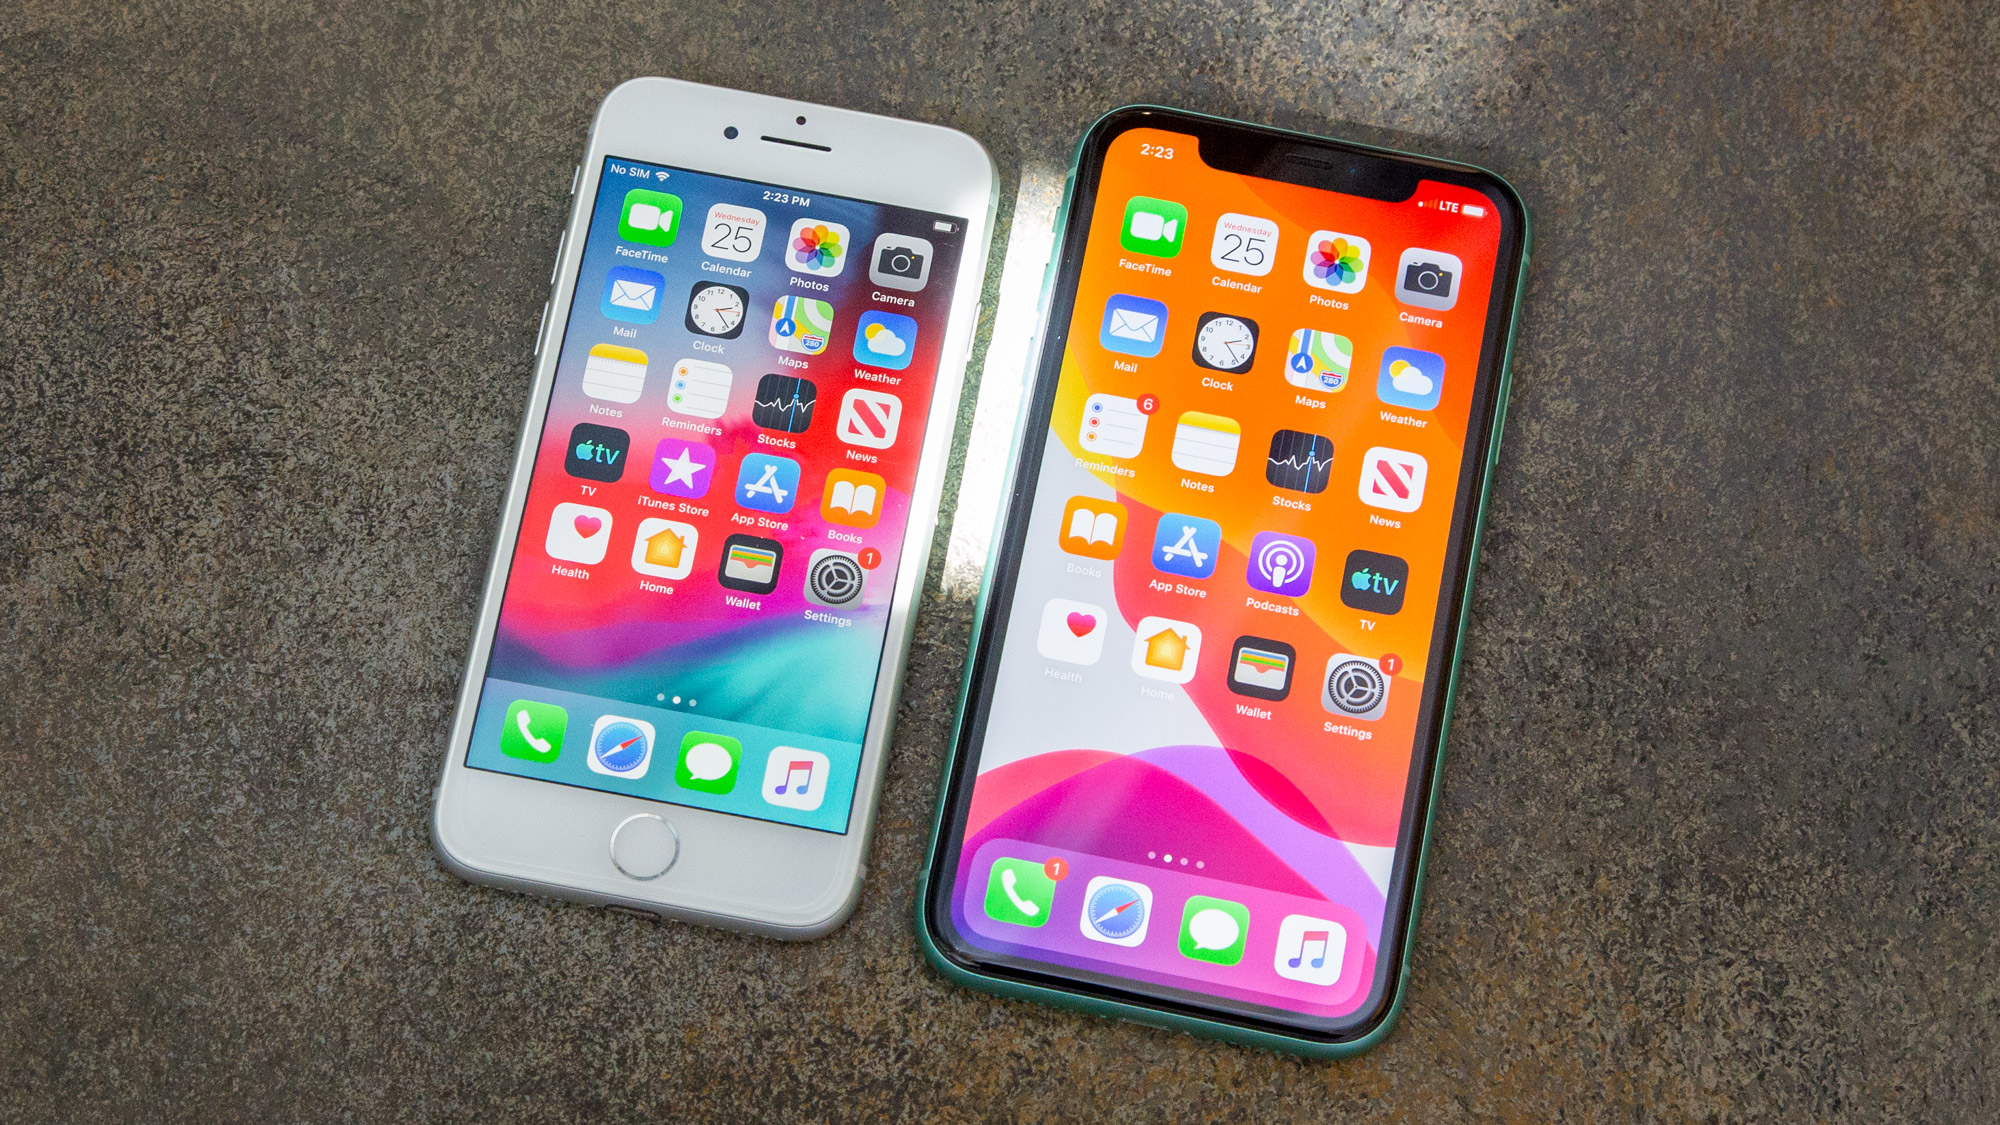 iPhone 8 dimensions and size comparison vs iPhone 7, Galaxy S8, LG G6